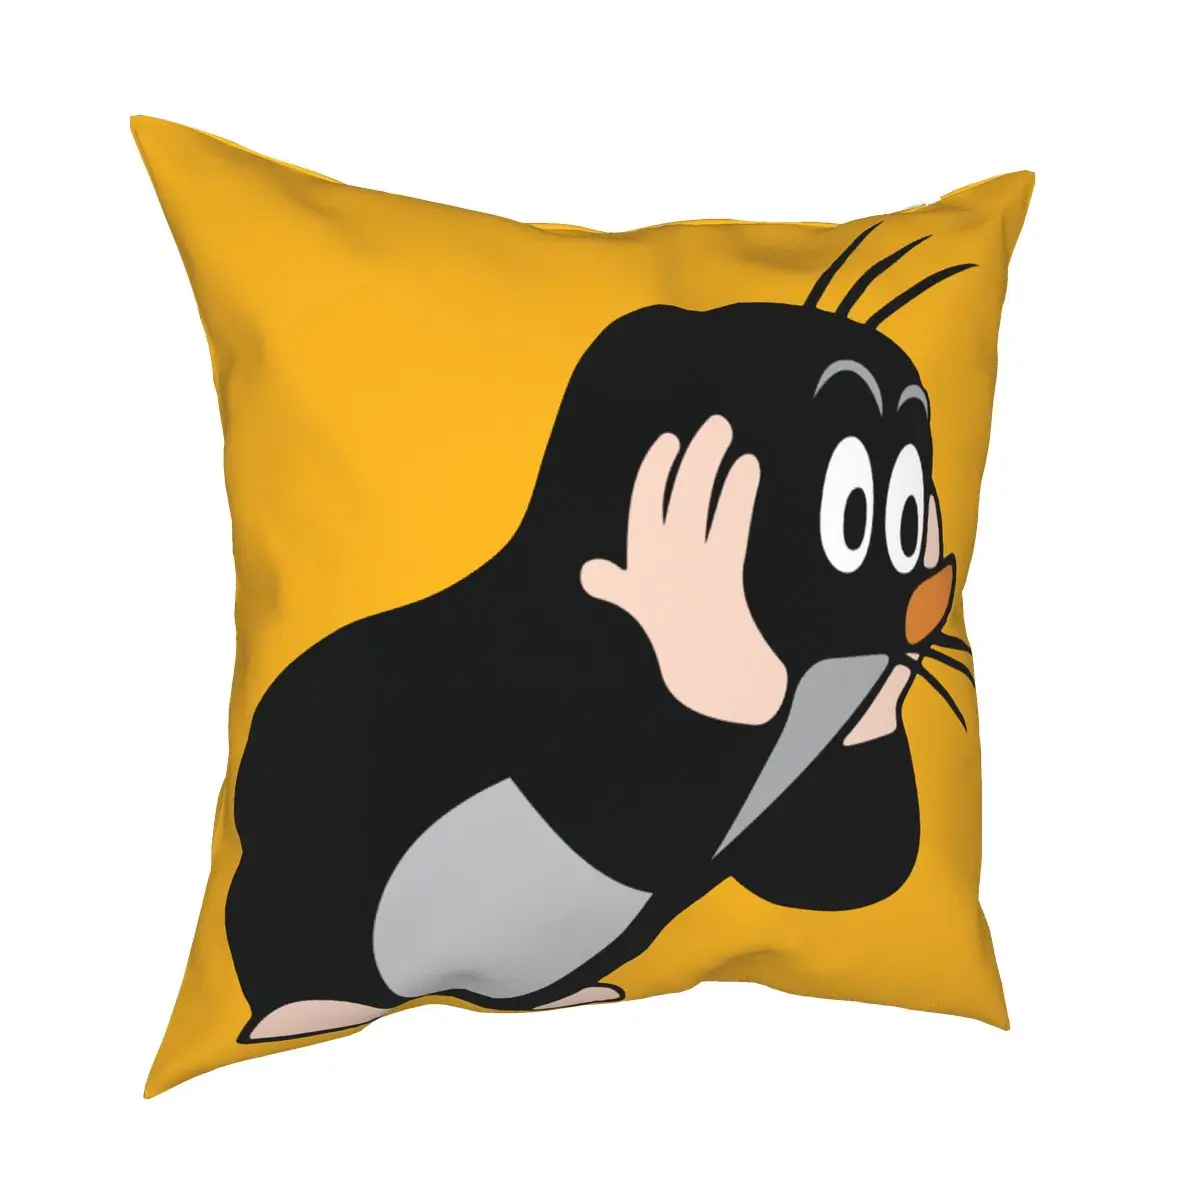 Mole Surprised Pillow Cover Decoration Krtek Little Maulwurf Cute Cartoon Cushion Cover Throw Pillow for Sofa Polyester